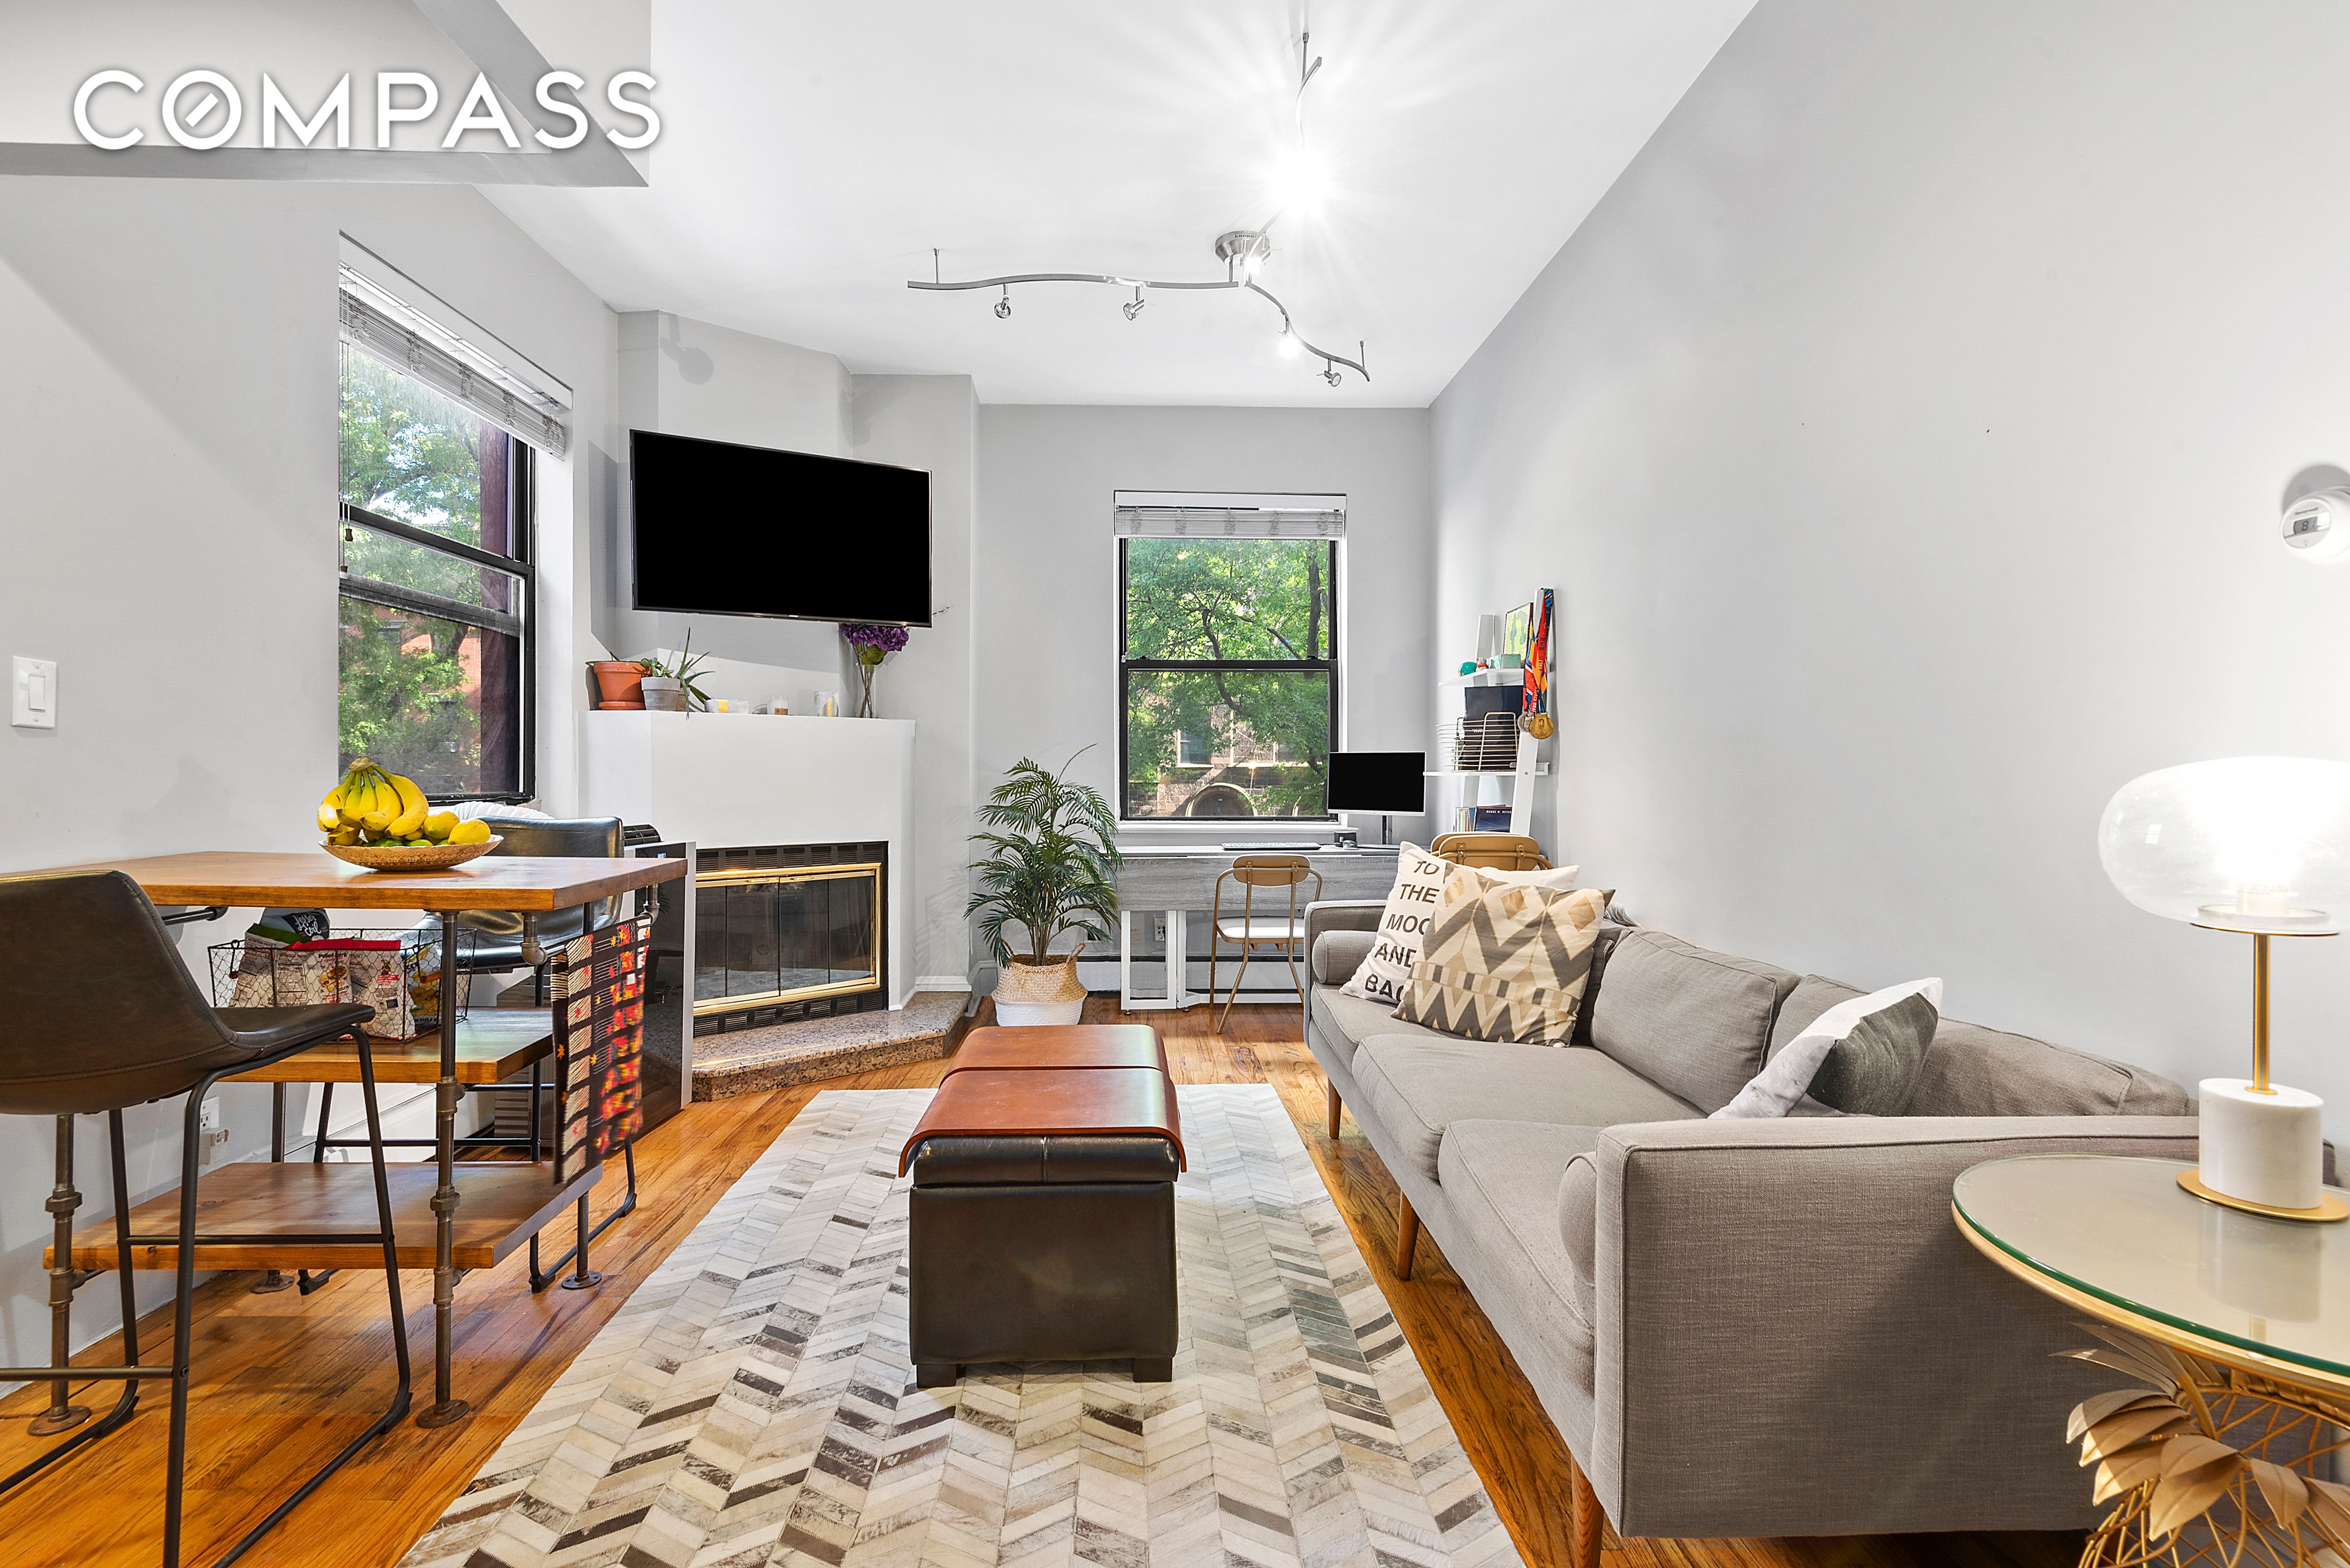 South Oxford Street 2D, Fort Greene, Brooklyn, New York - 2 Bedrooms  

4 Rooms - 